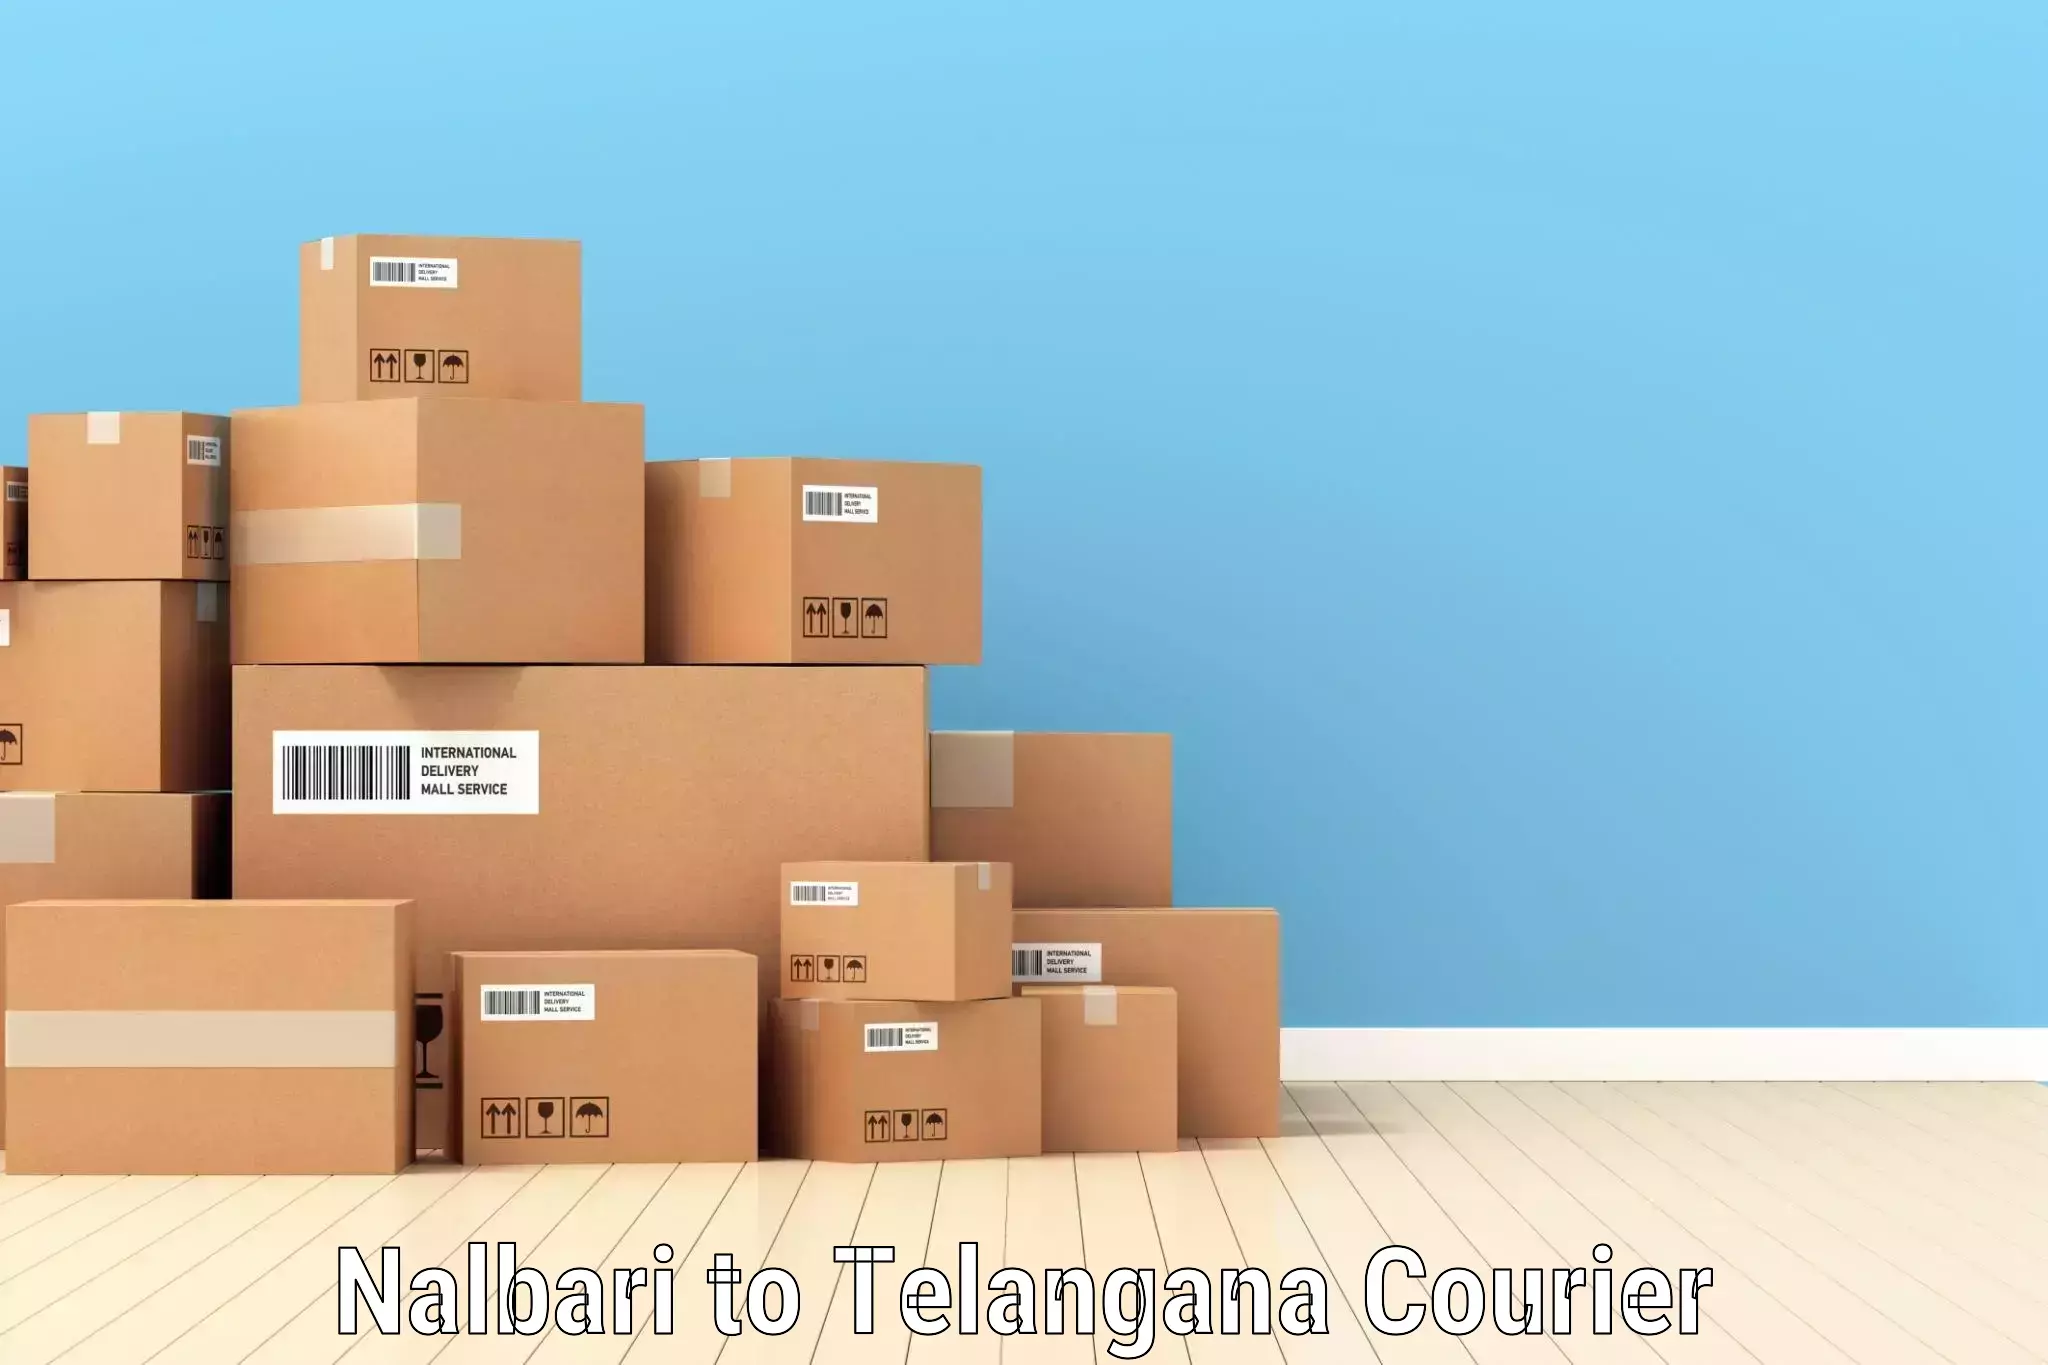 Tech-enabled shipping in Nalbari to Hyderabad